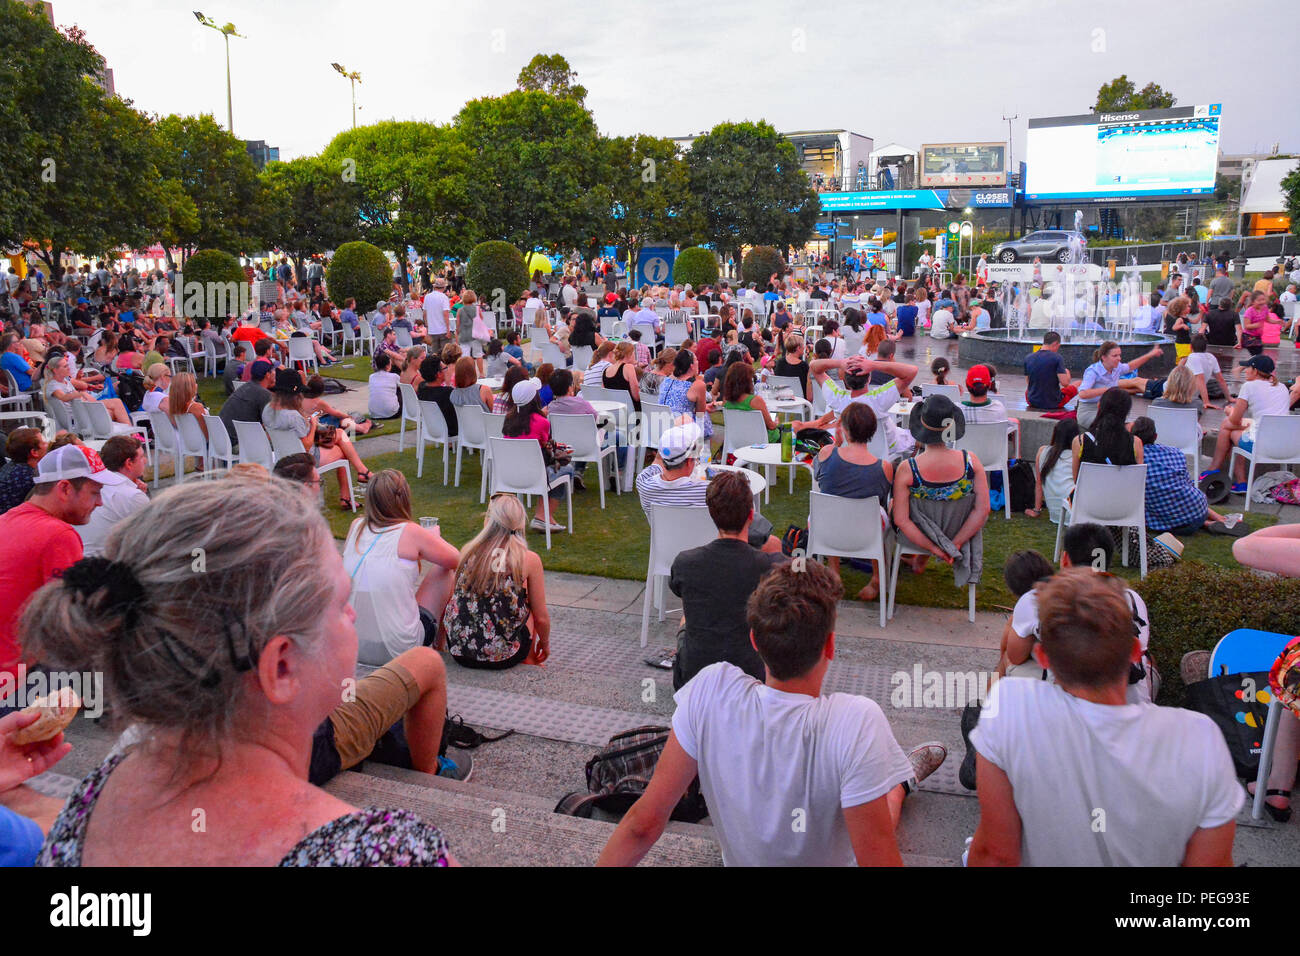 People cheer for the tennis players in Australian Open, Melbourne Stock Photo